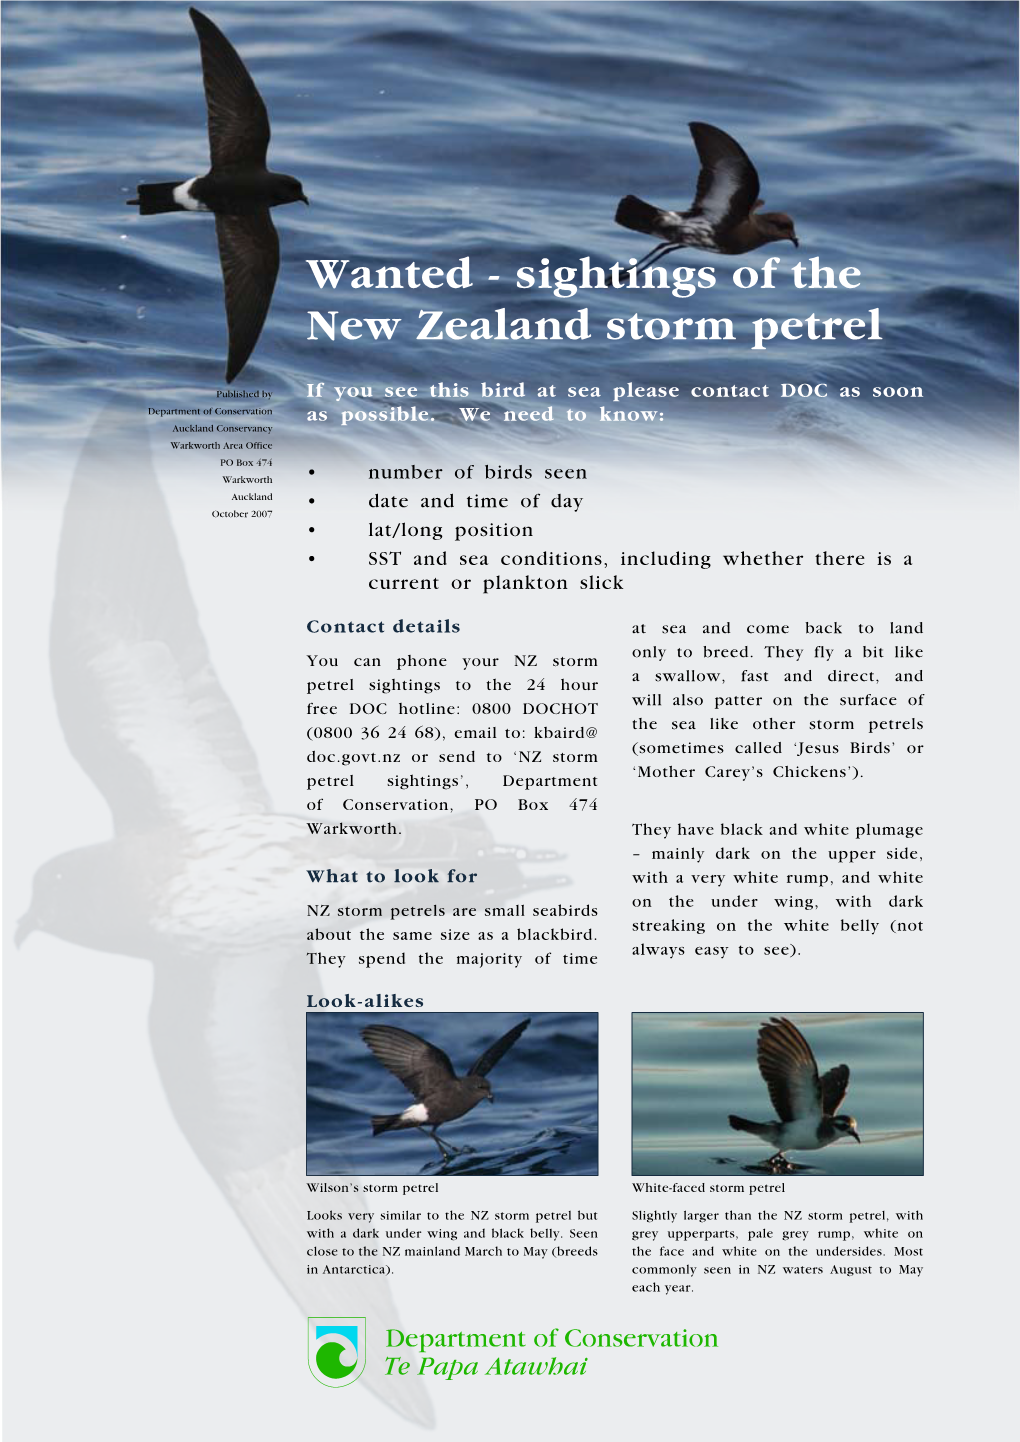 Sightings of the NZ Storm Petrel